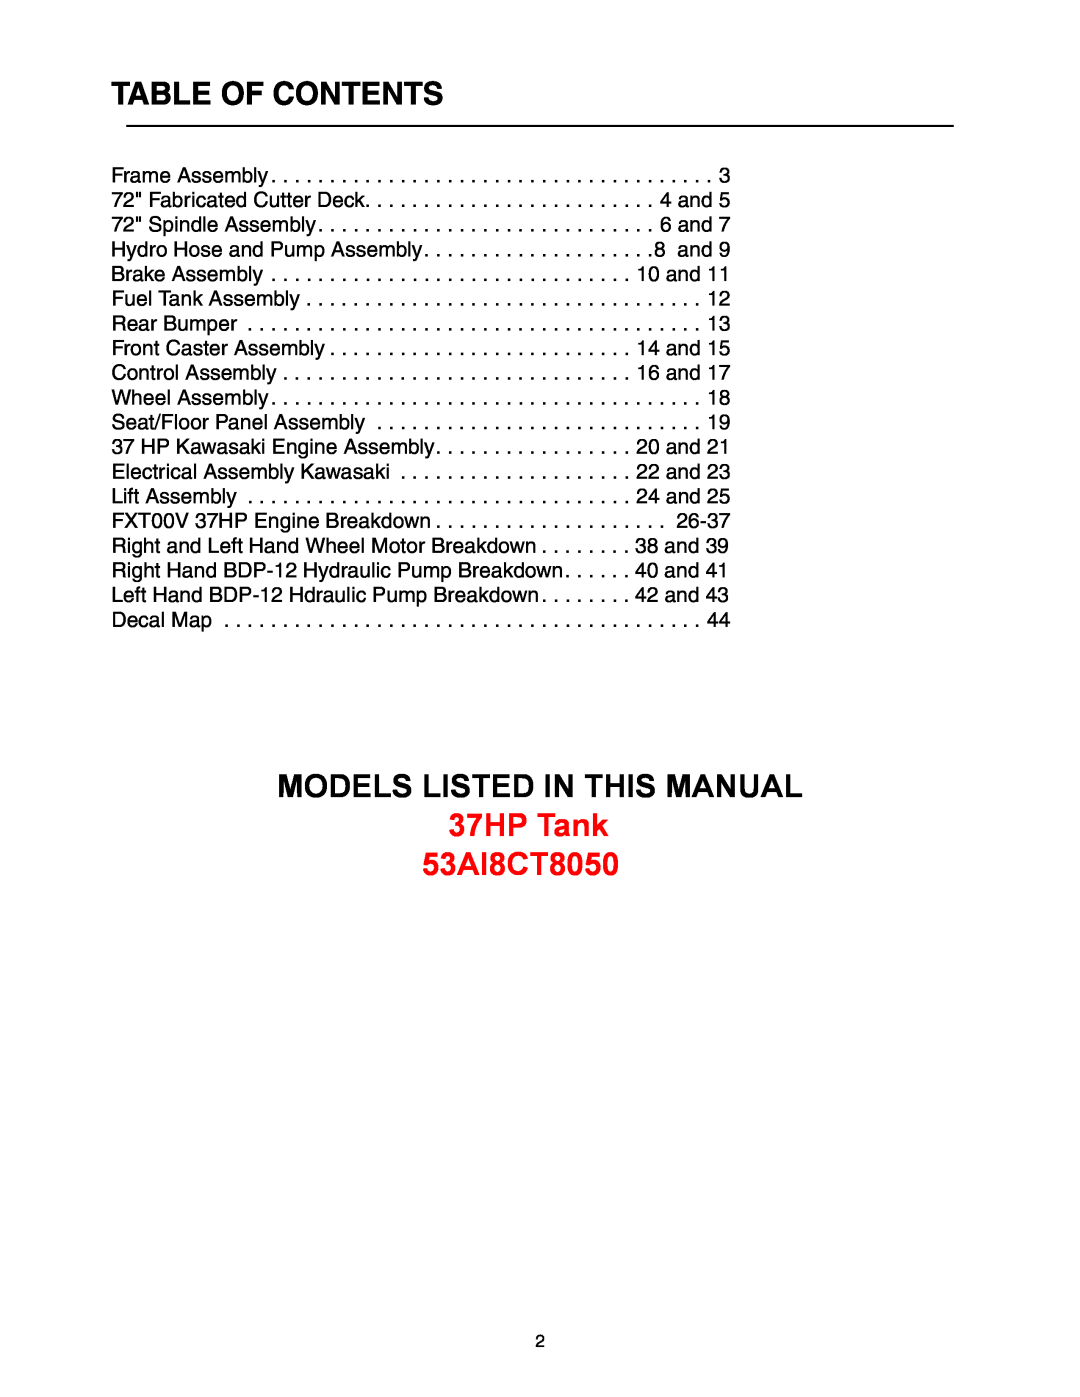 Cub Cadet manual Table Of Contents, Models Listed In This Manual, 37HP Tank 53AI8CT8050 